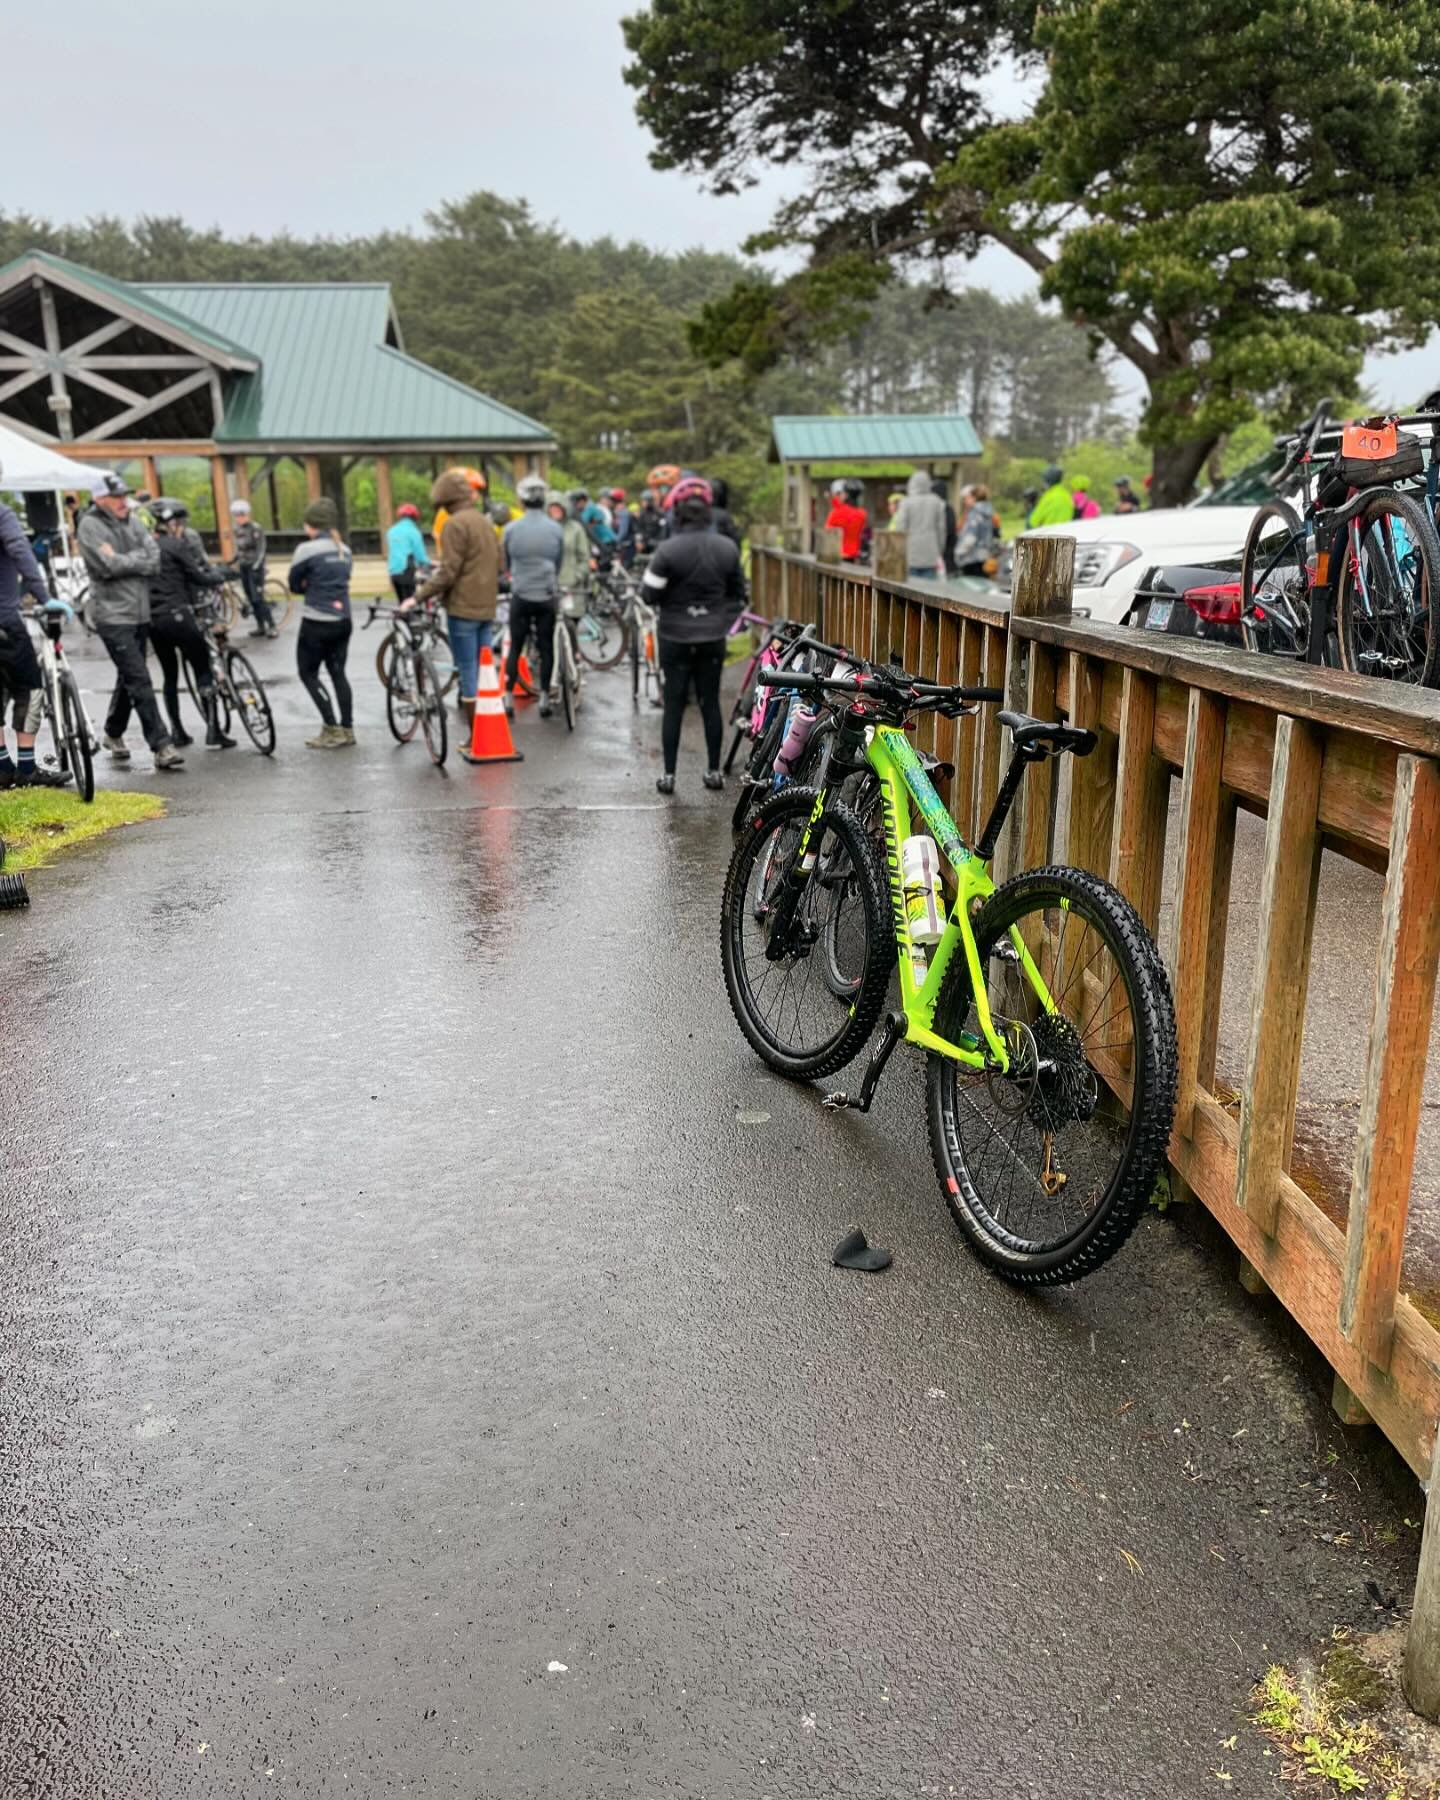 WELCOME @mudslingerevents to Yachats!!!! Good luck with all races today!! 
Yachats has so many fun mountain bike trails to explore! Get out and have fun! Even on a rainy day!